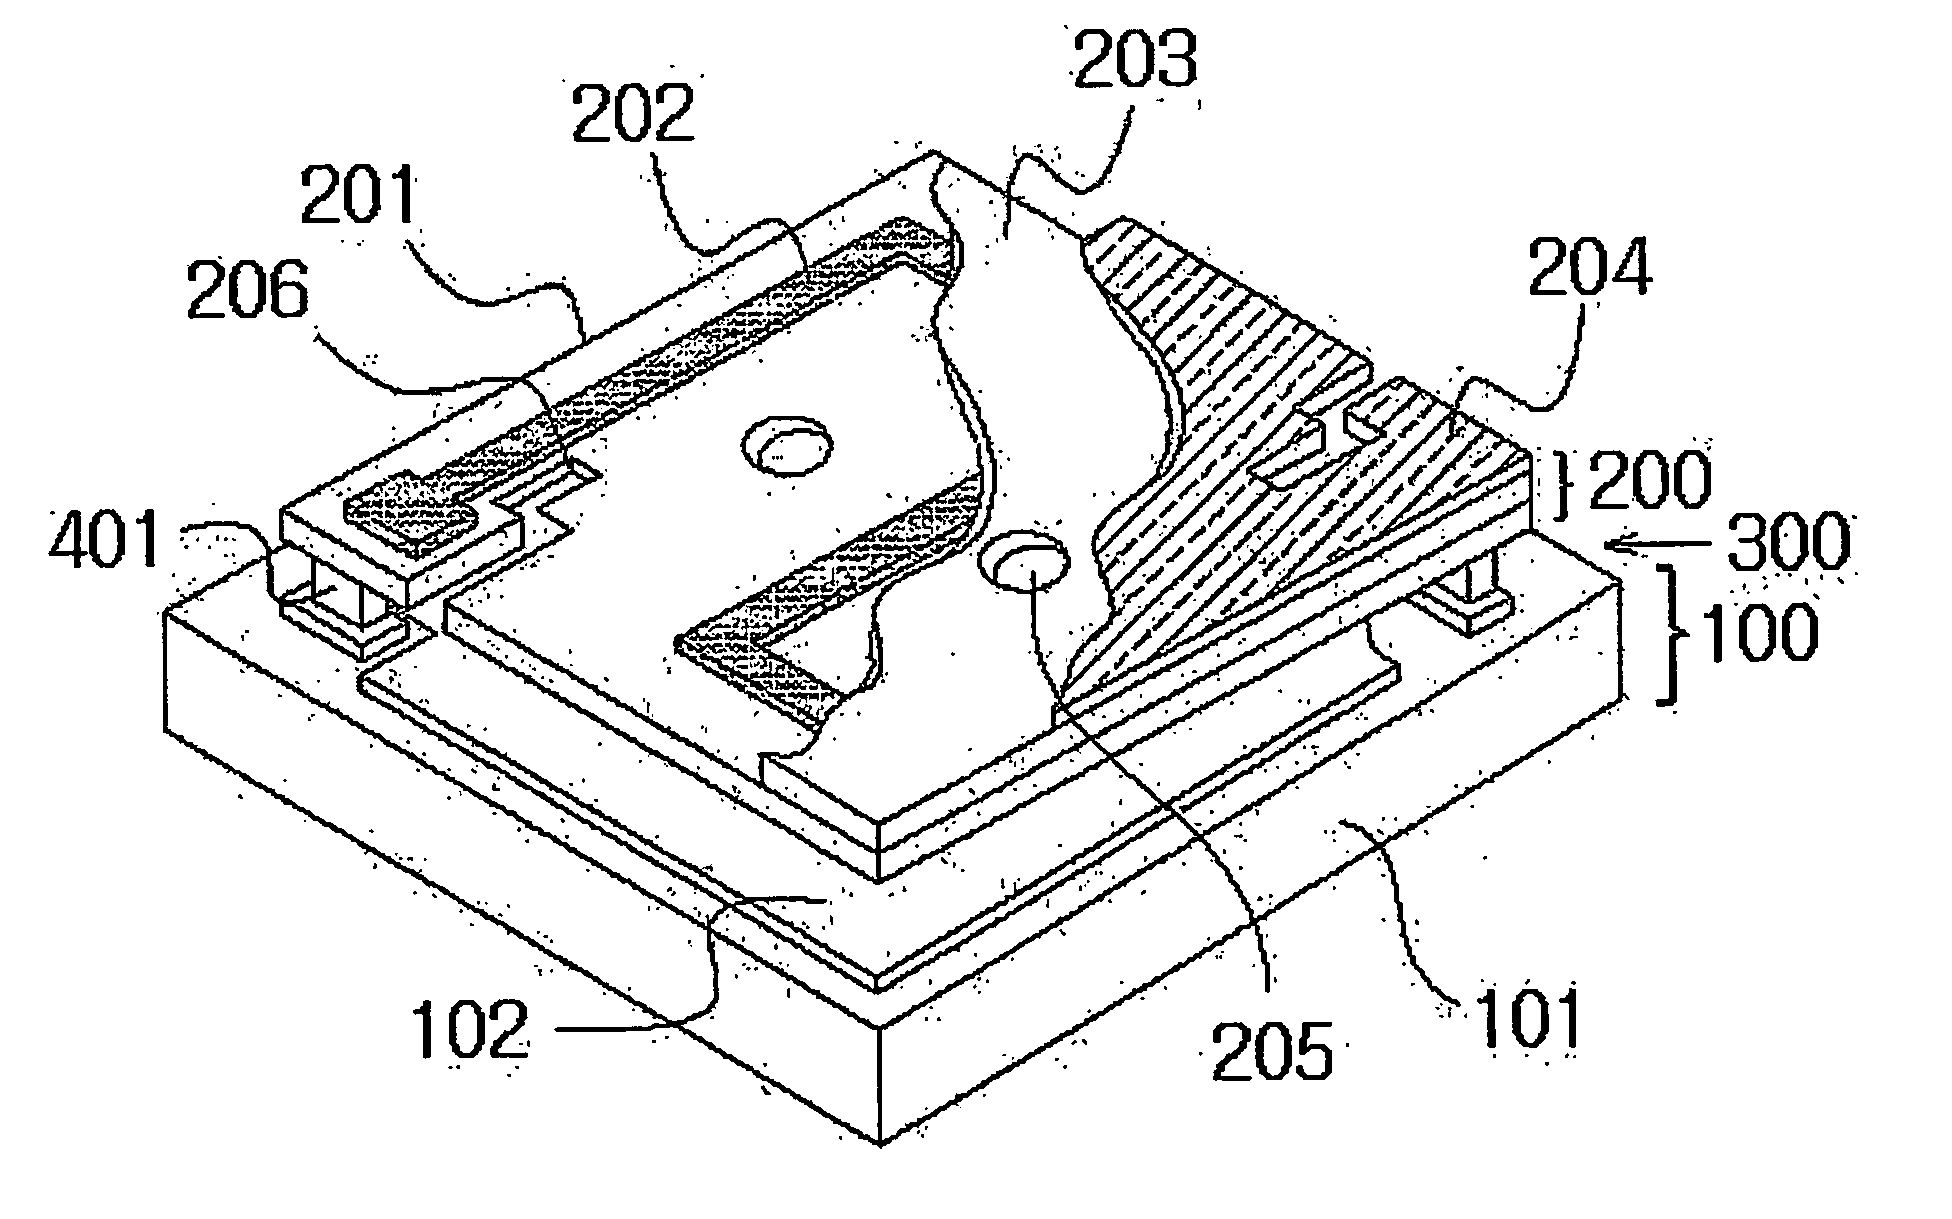 Bolometric Infrared Sensor Having Two-Layer Structure and Method for Manufacturing the Same